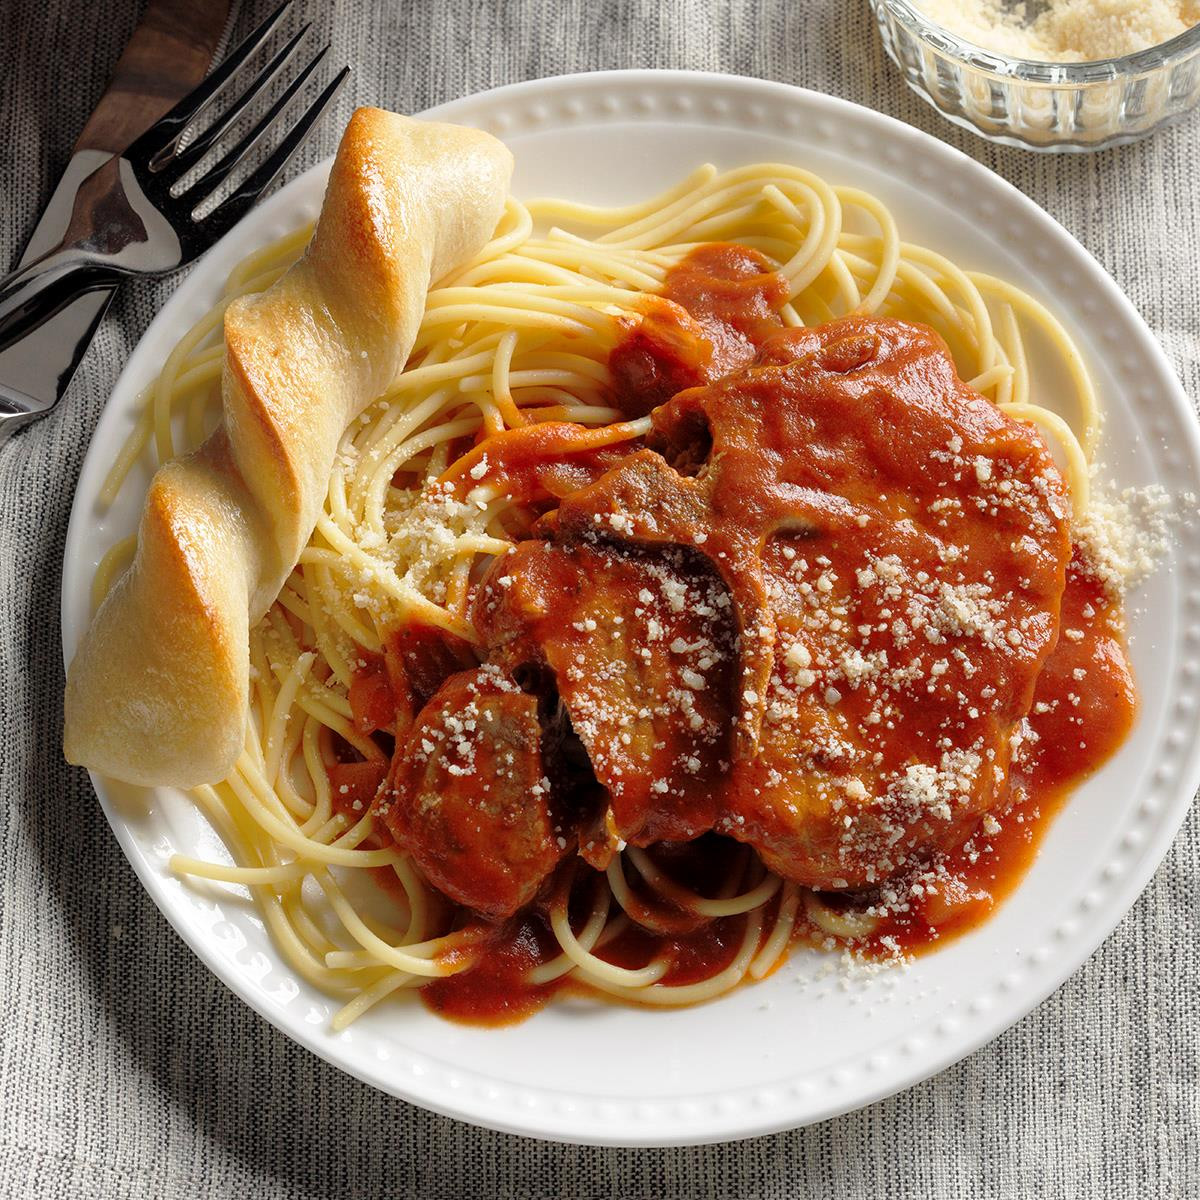 Top 15 Pork Chops and Pasta